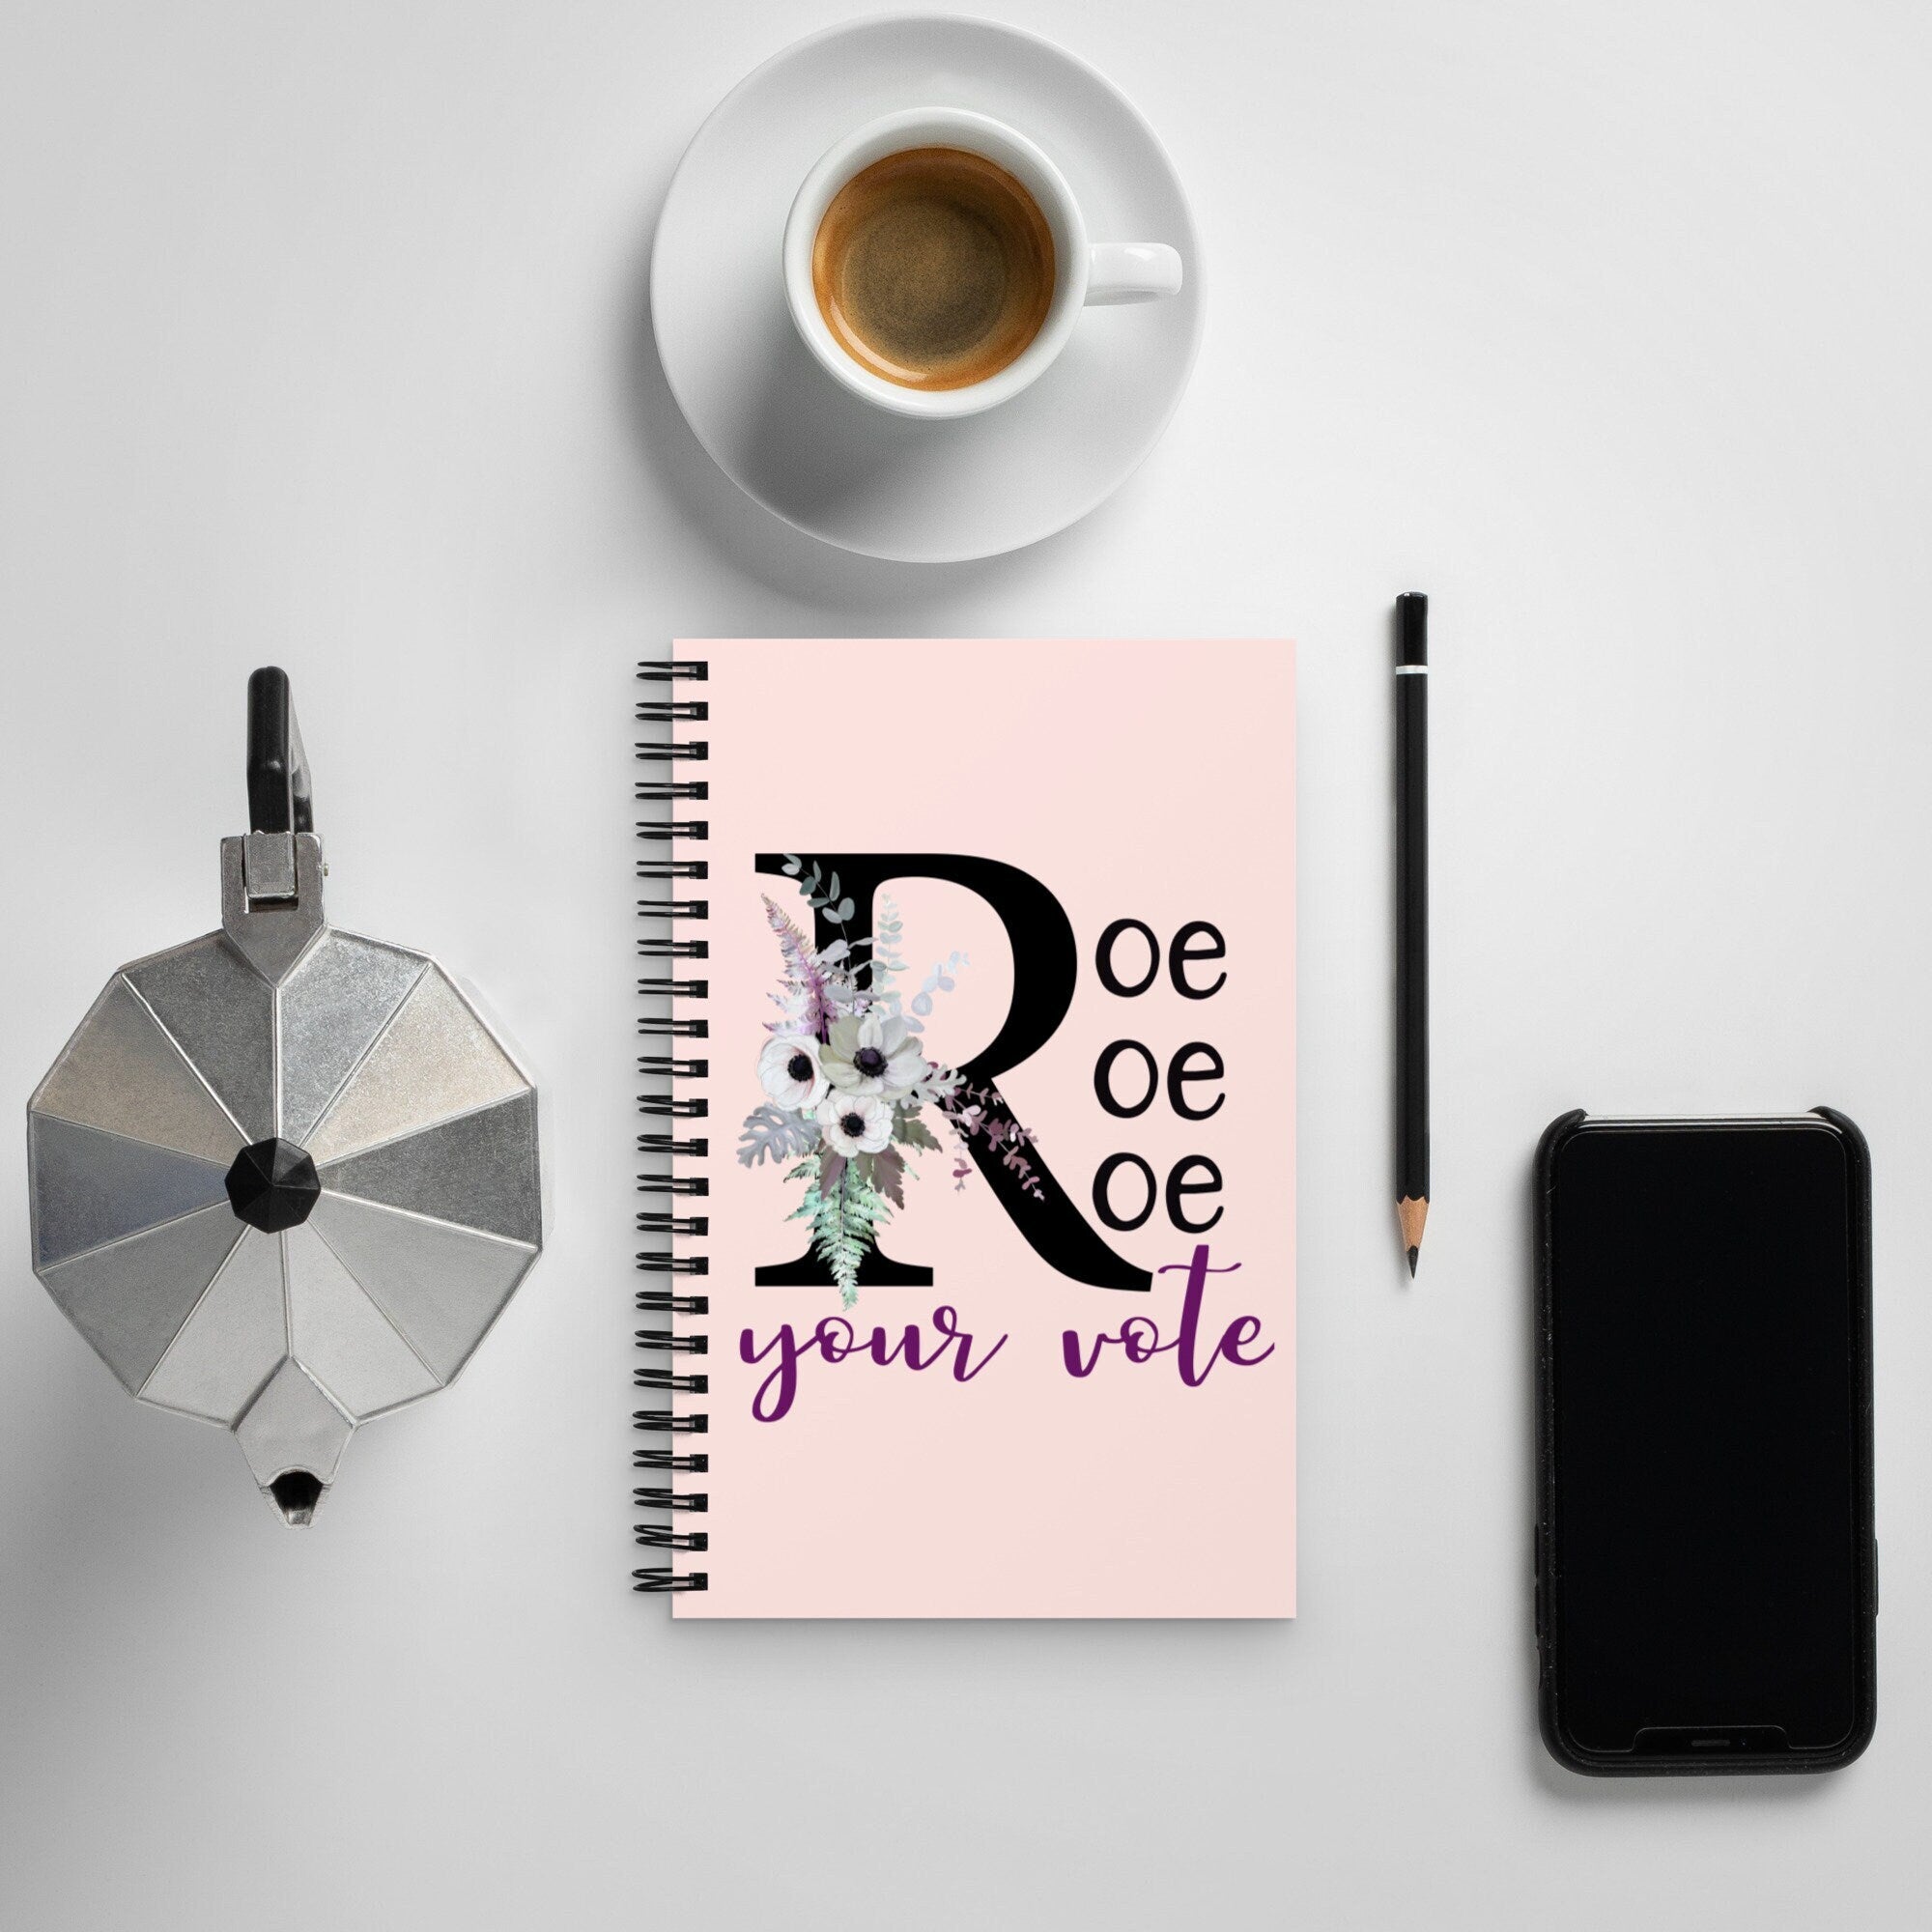 Roe Roe Roe Your Vote Pink Spiral Notebook Salt and Sparkle